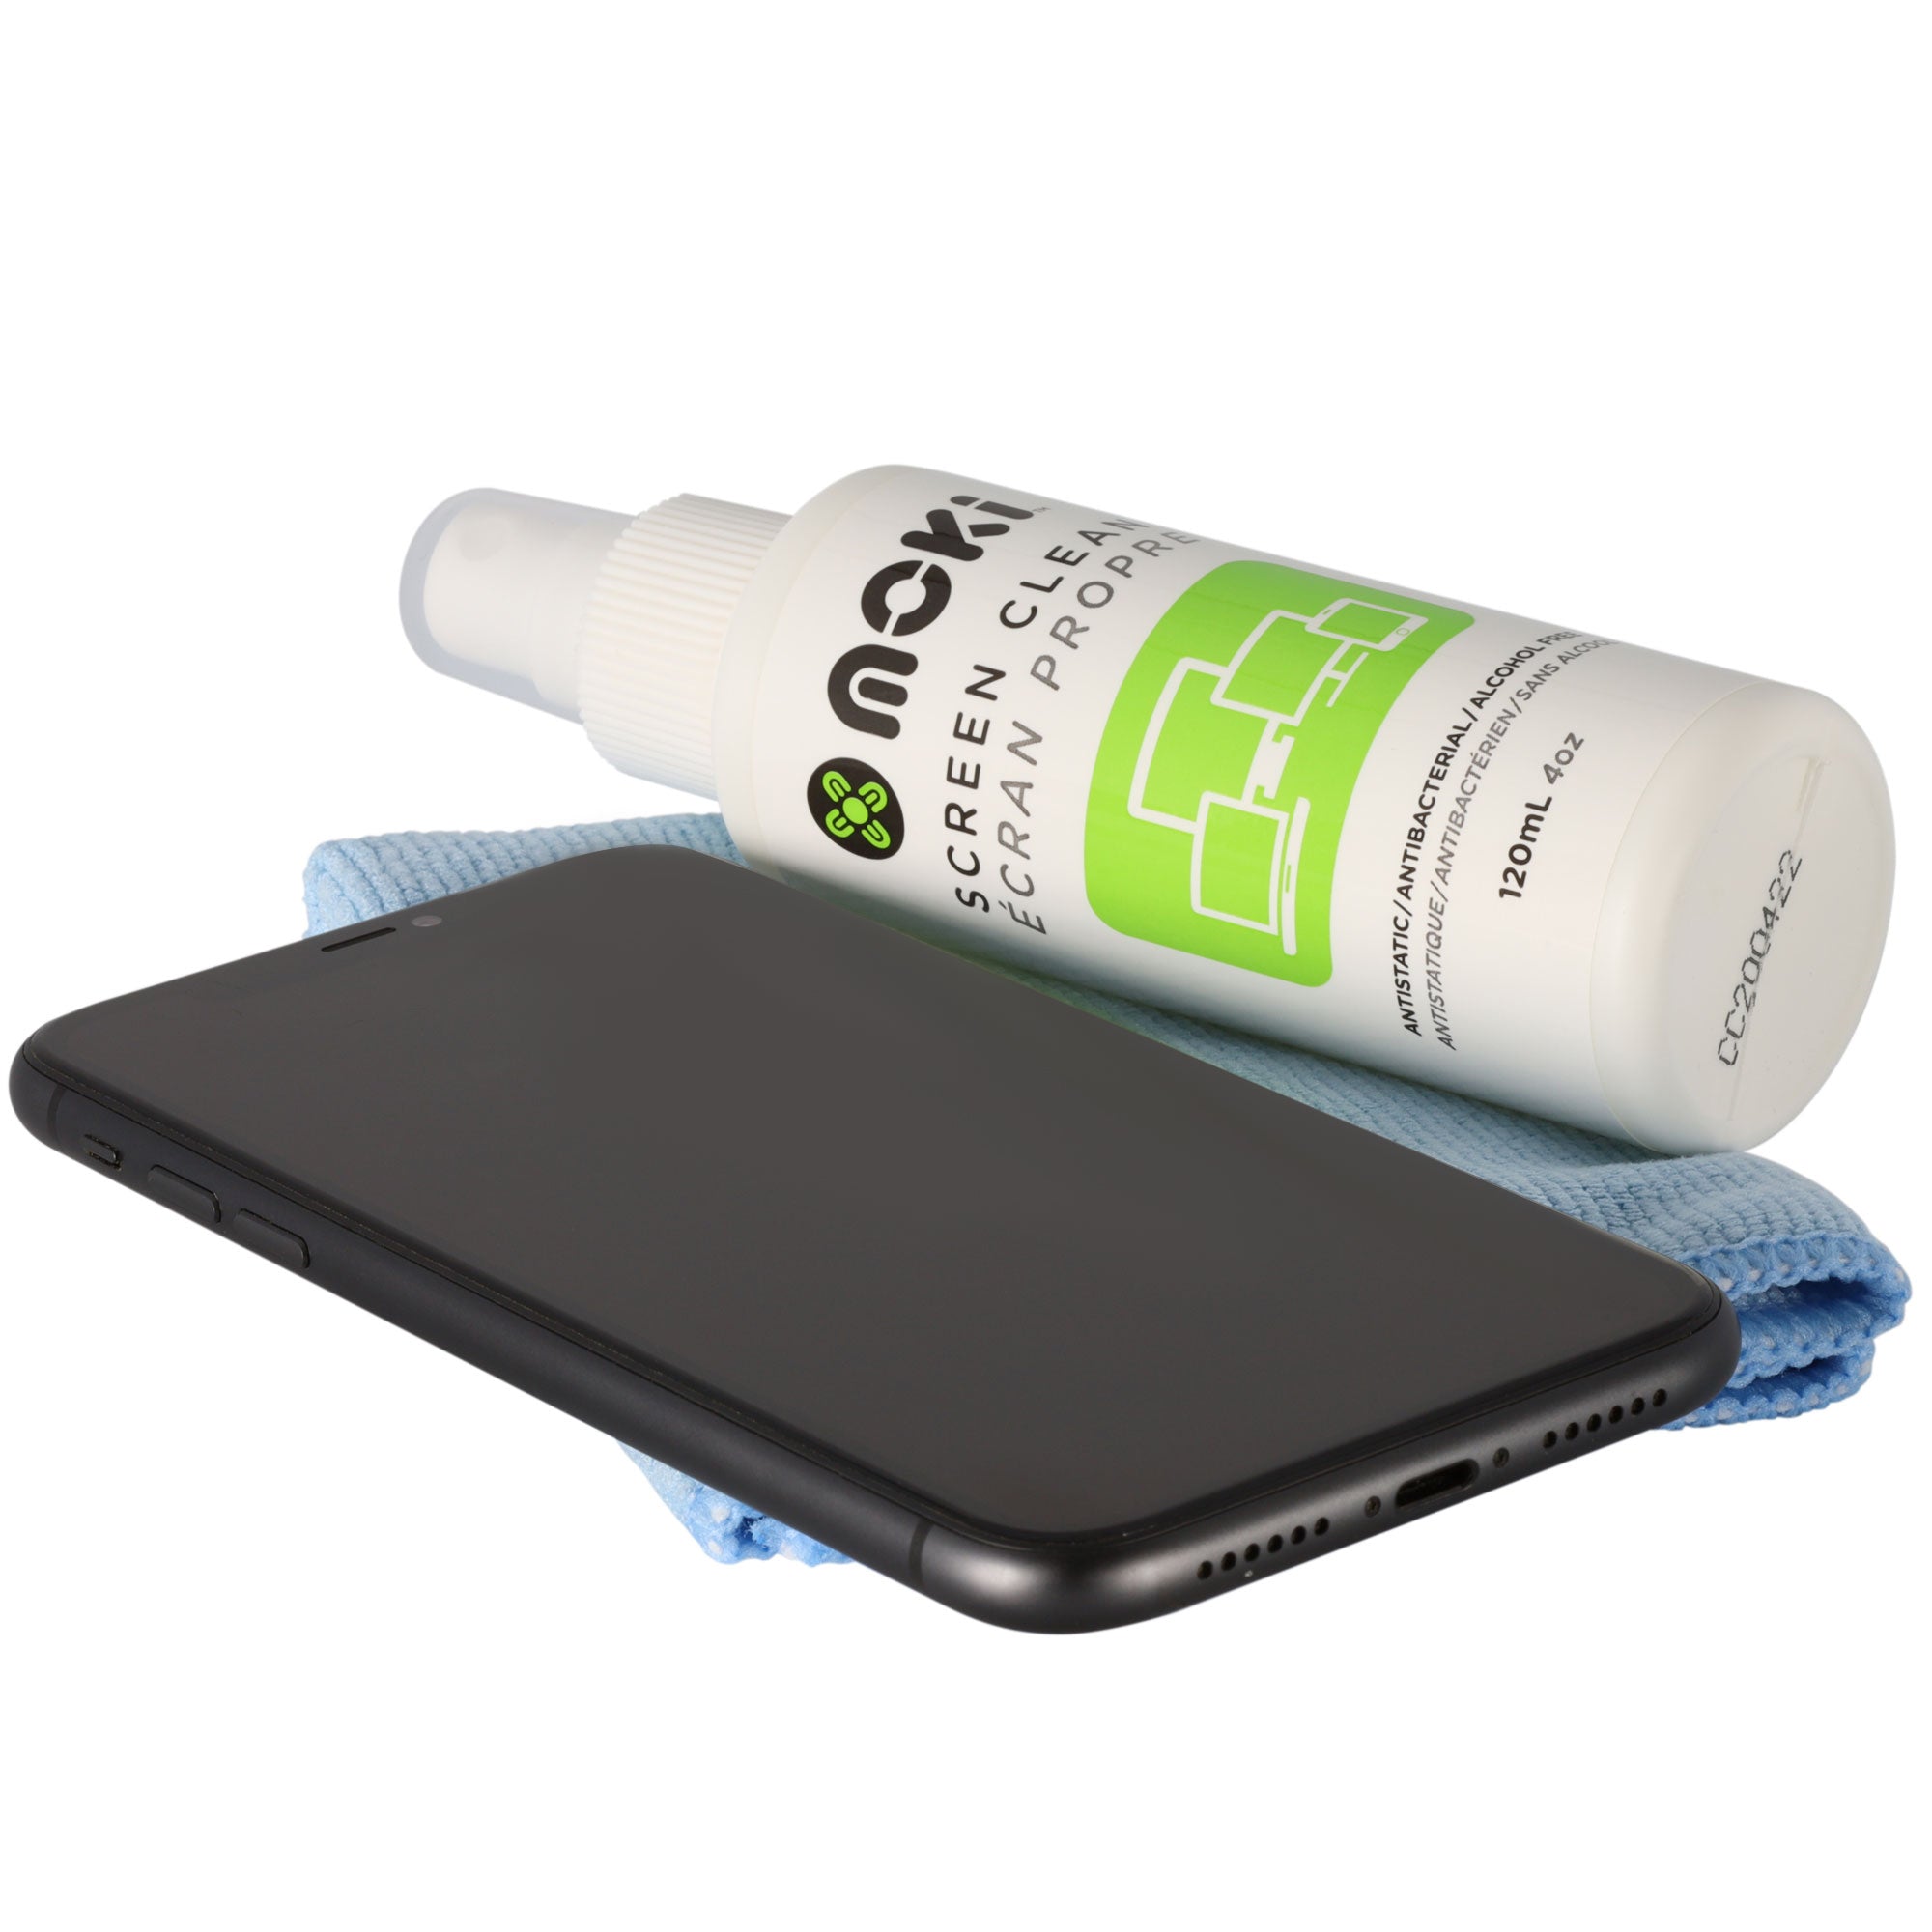 Lycra Mobile Smart Pocket - Mobile Peripheral Products - Product - Agomax -  Microfiber Cloth, Promotional Gifts, Corporate Gifts, Corporate Giveaways,  Sticky Screen Cleaner